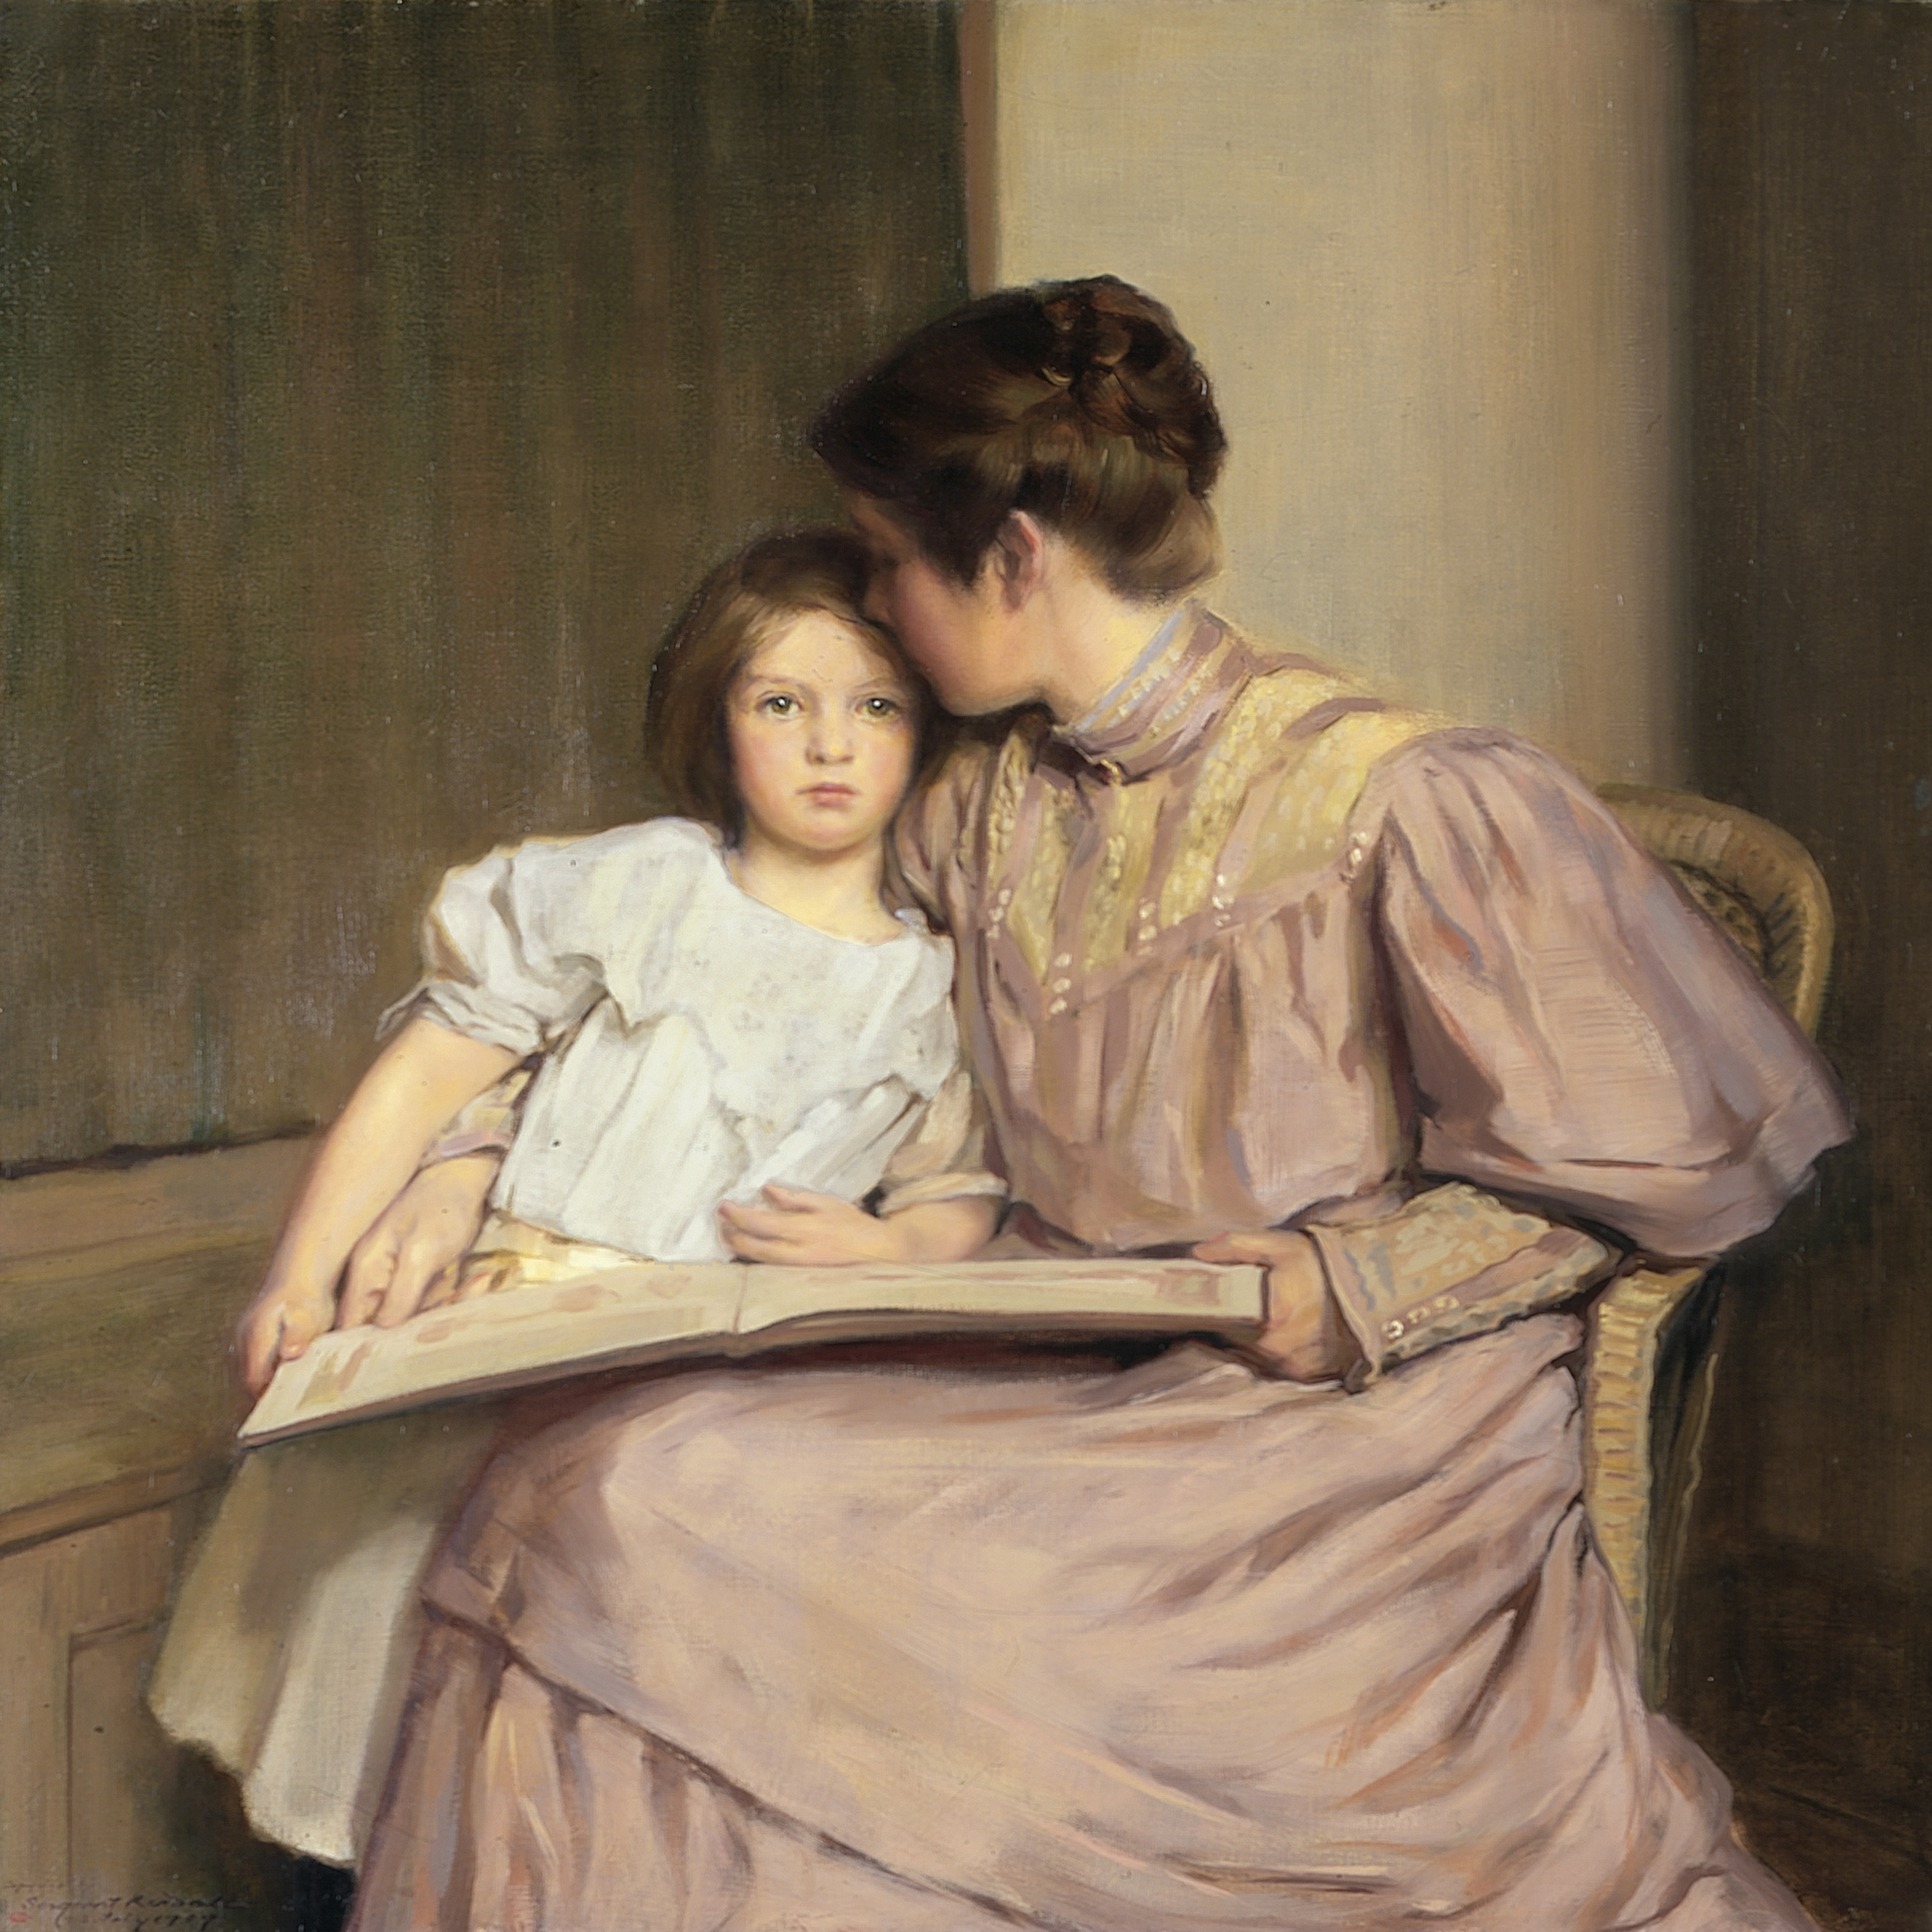 Springville Museum of Art - The Artist's Wife and Daughters